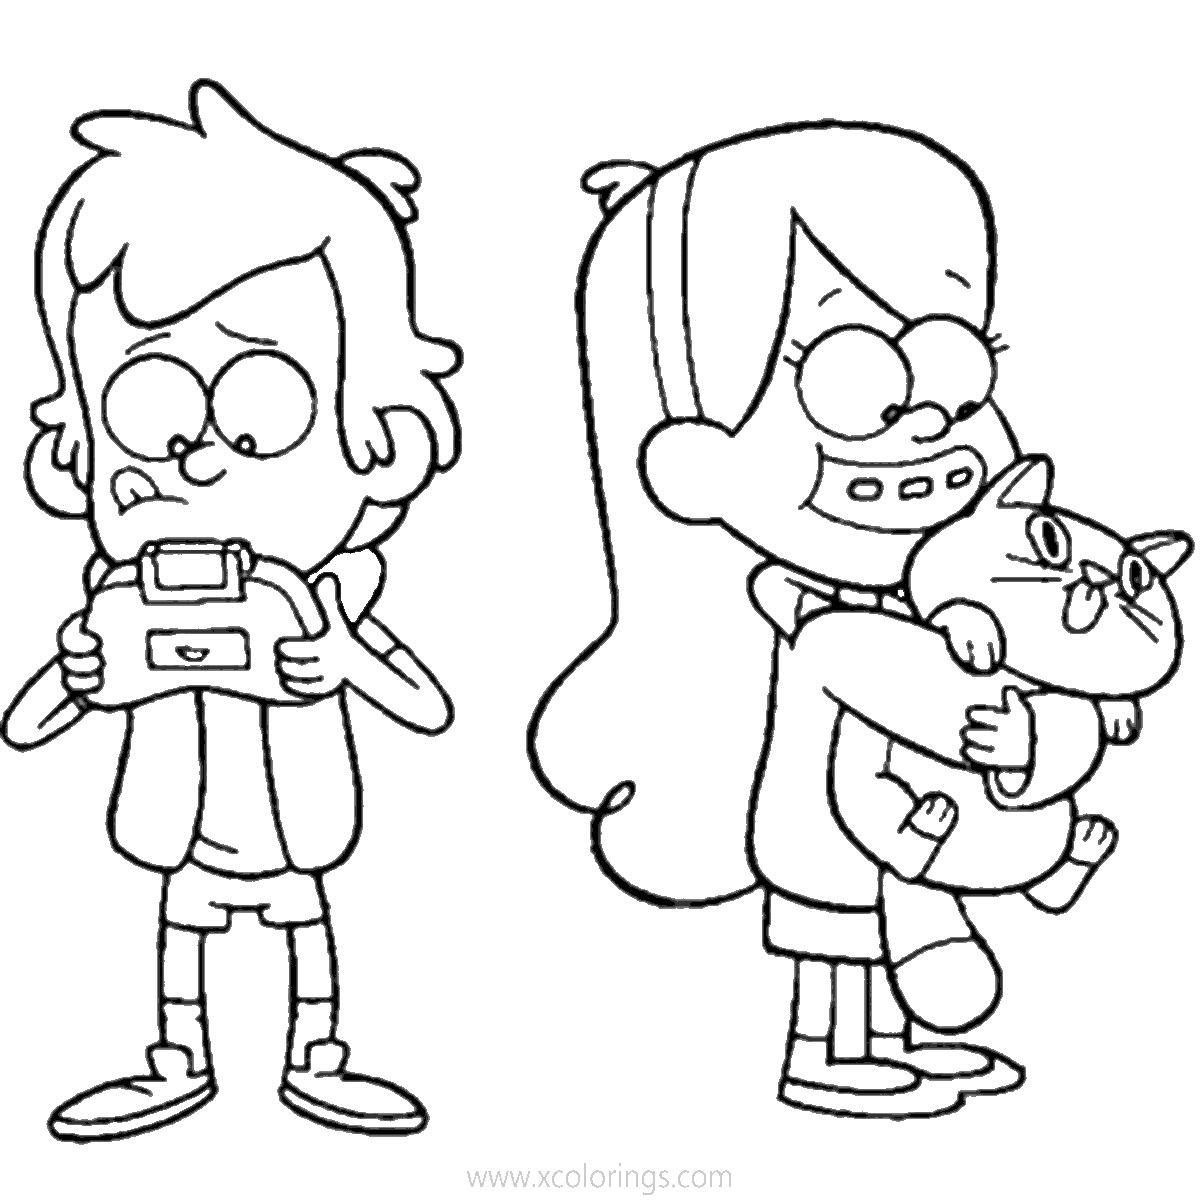 Free Gravity Falls Coloring Pages Dipper Playing Game and Mabel with a Cat printable